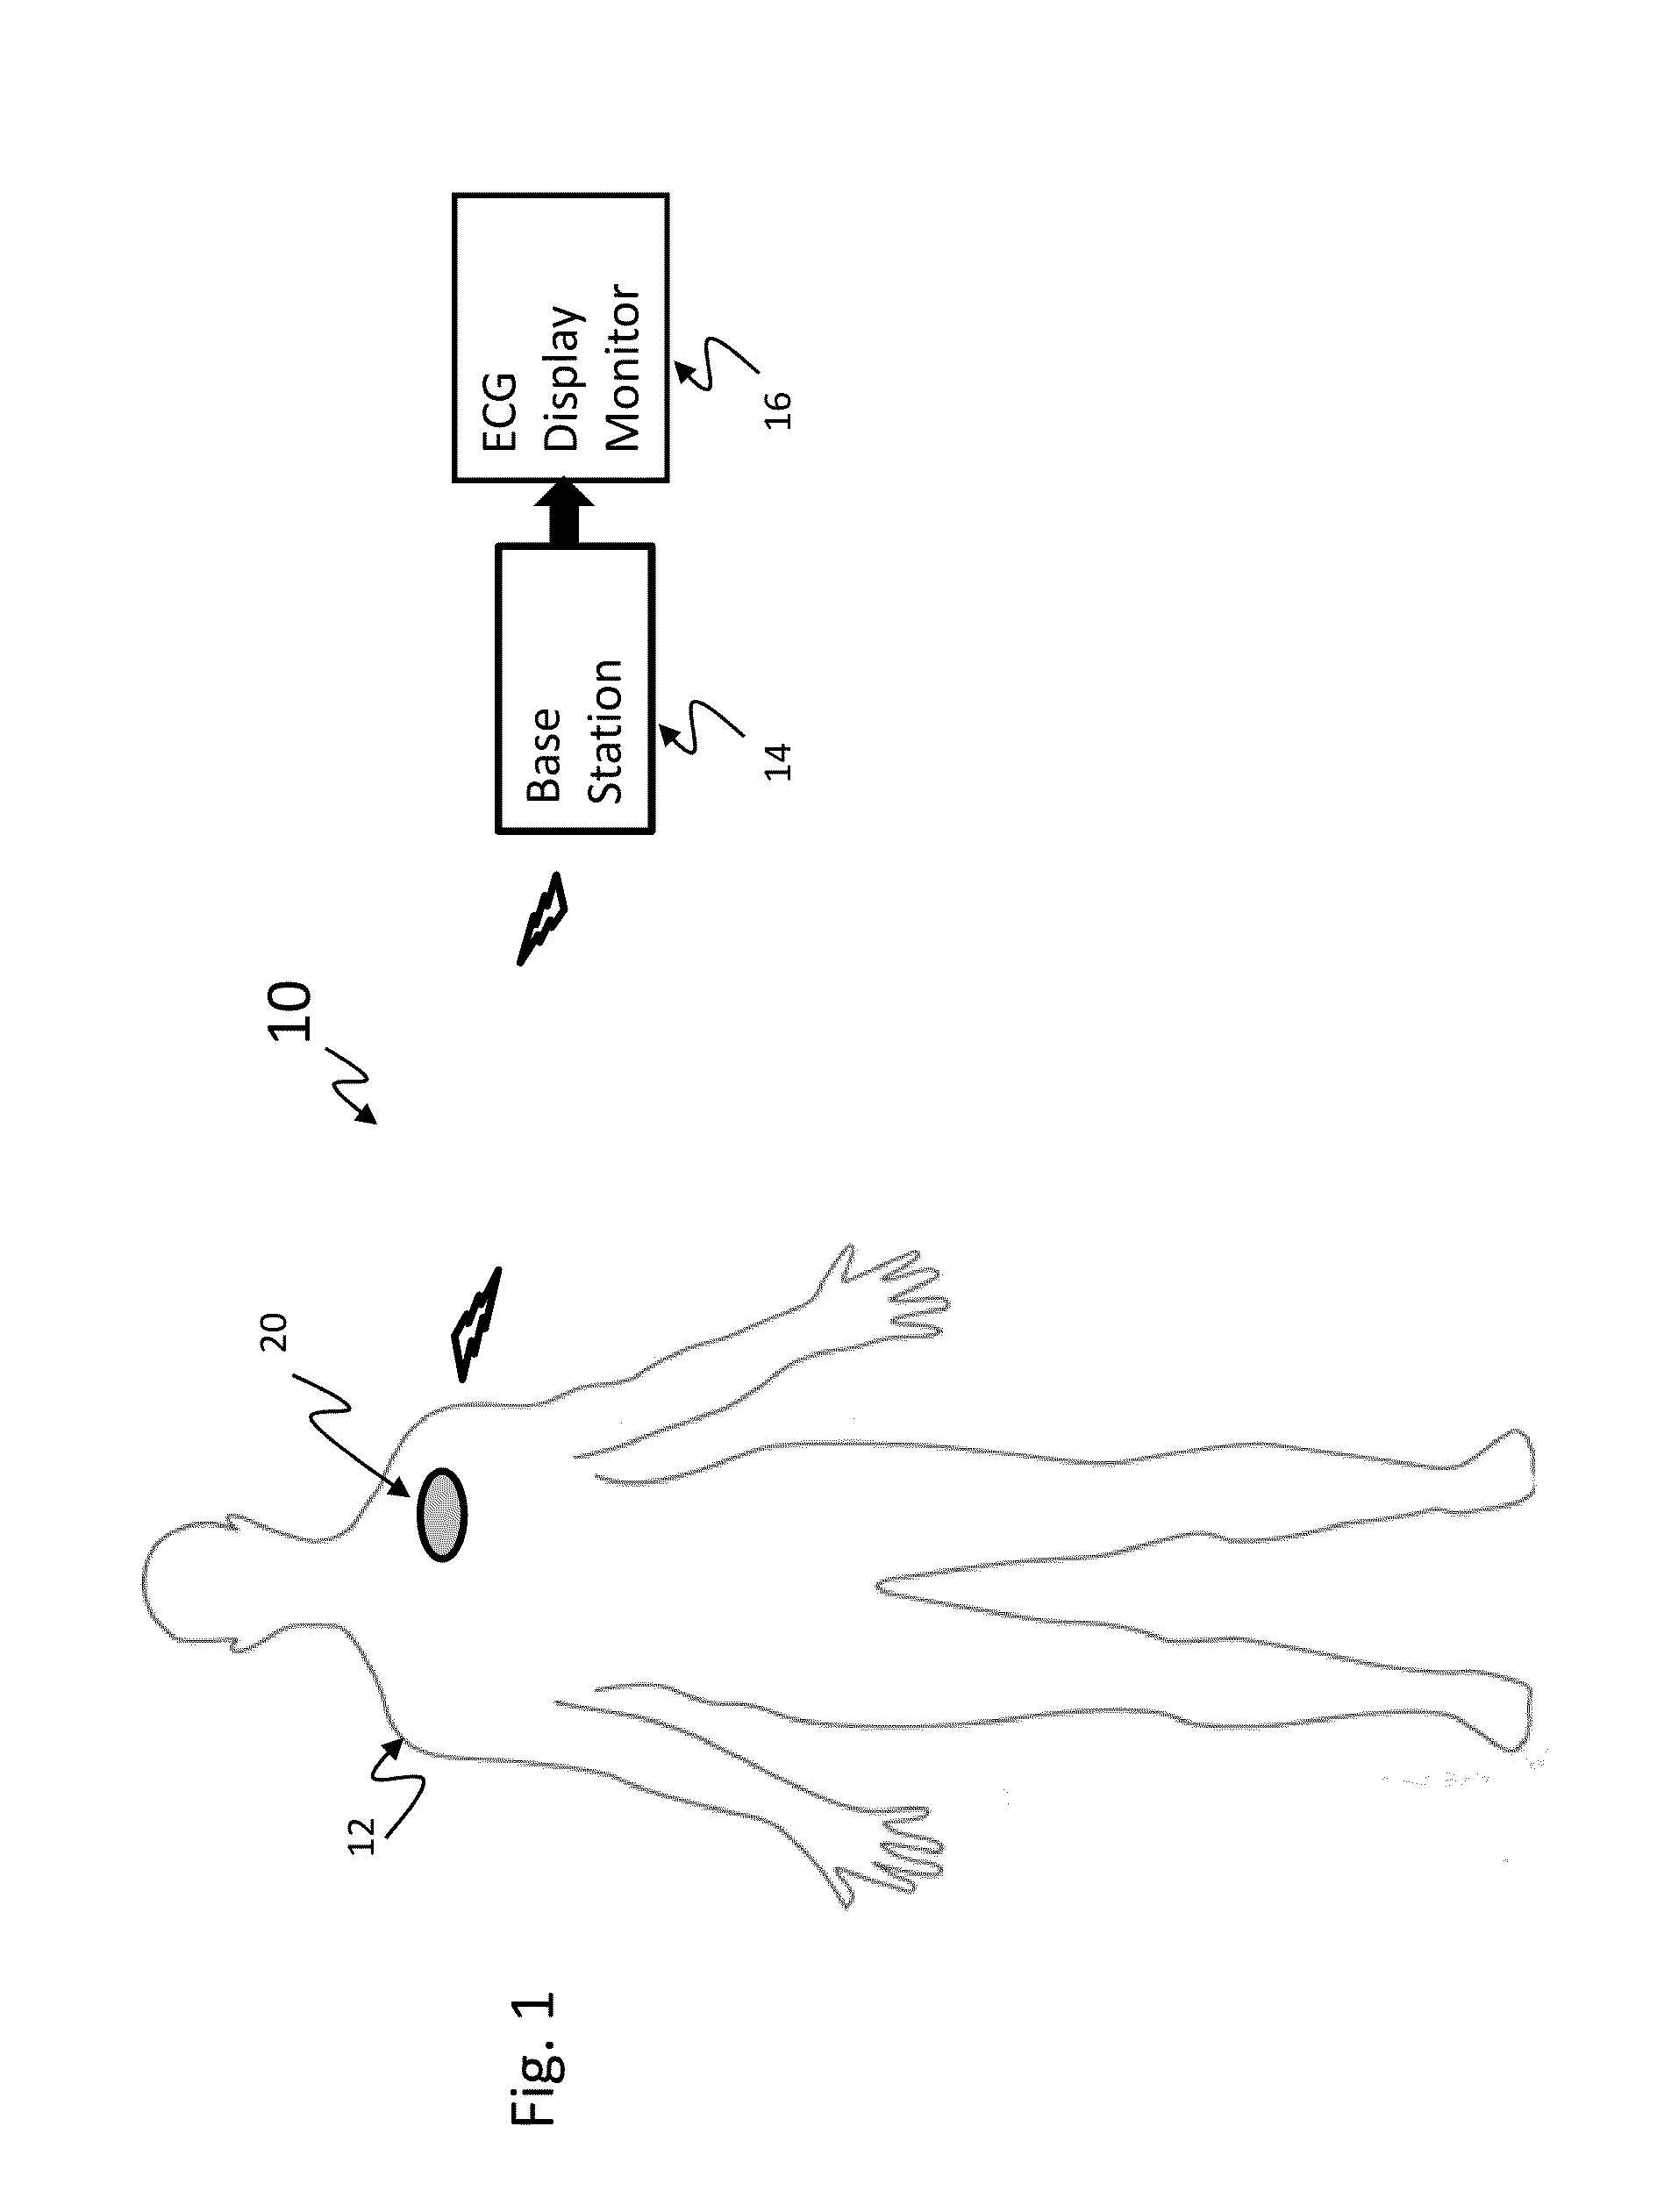 Leadless wireless ECG  measurement system and method for measuring of bio-potential electrical activity of the heart